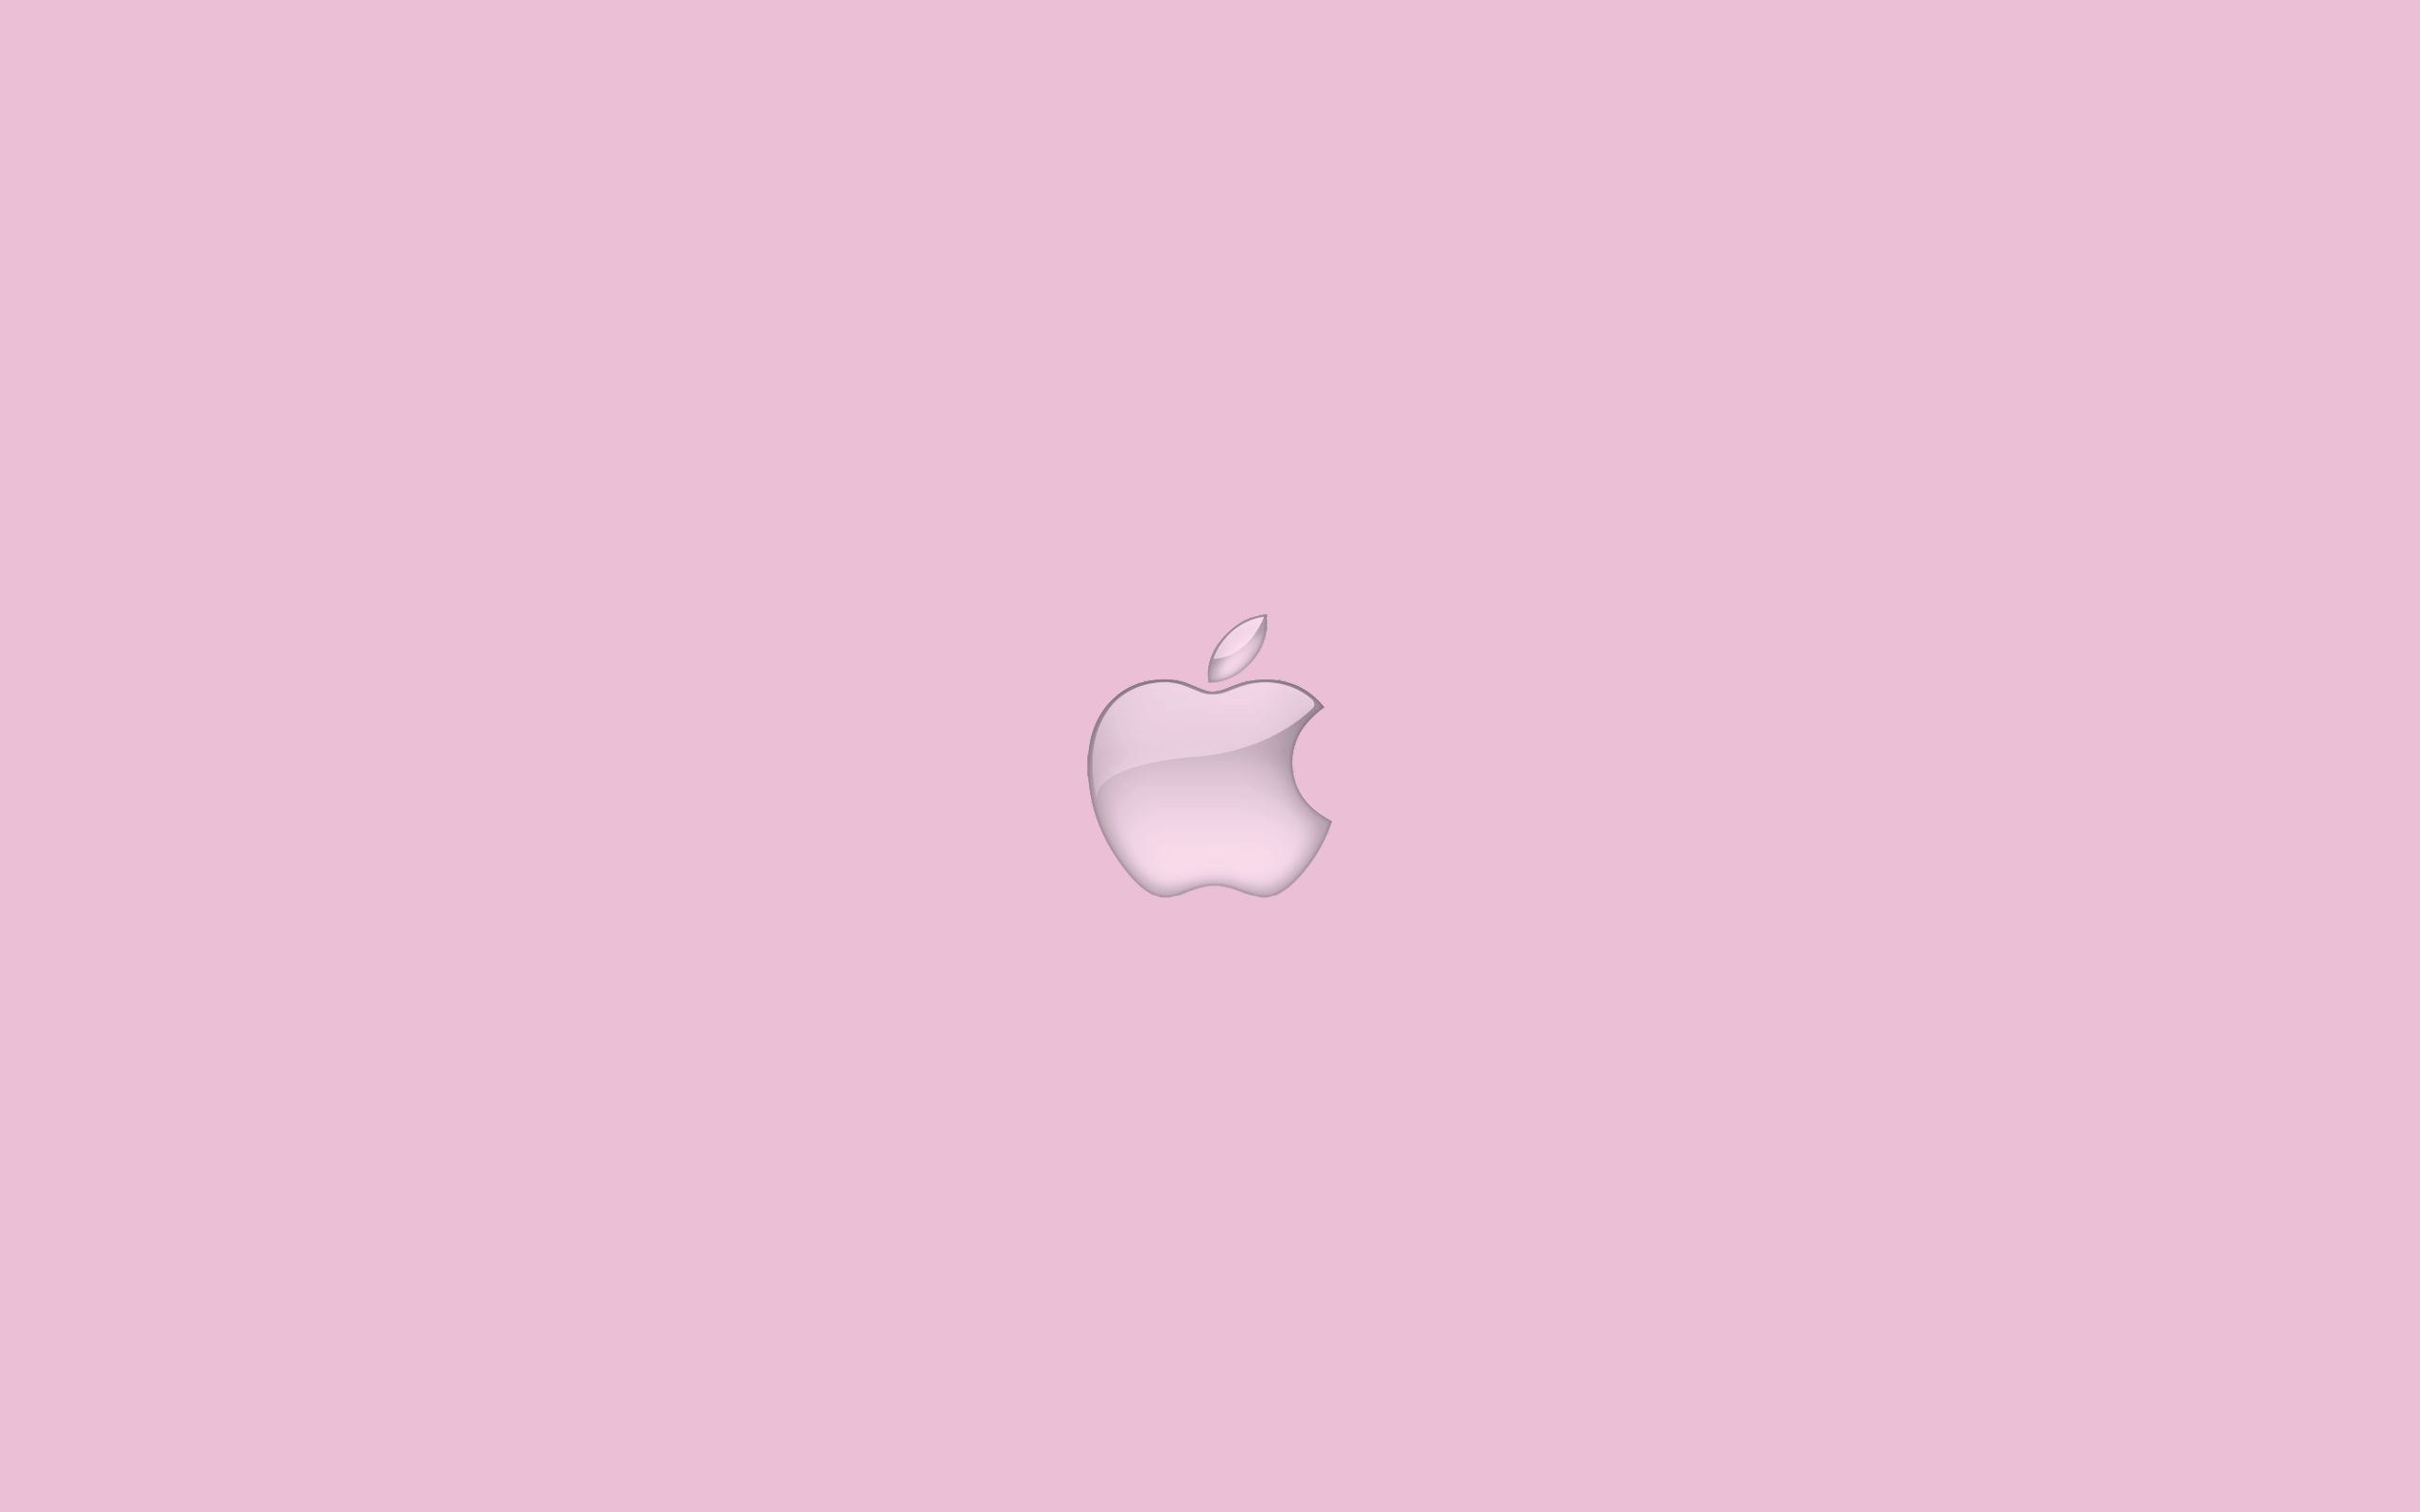 Download wallpapers 4K Apple 3D logo artwork pink realistic balloons Apple  logo pink backgrounds Apple for desktop with resolution 3840x2400 High  Quality HD pictures wallpapers